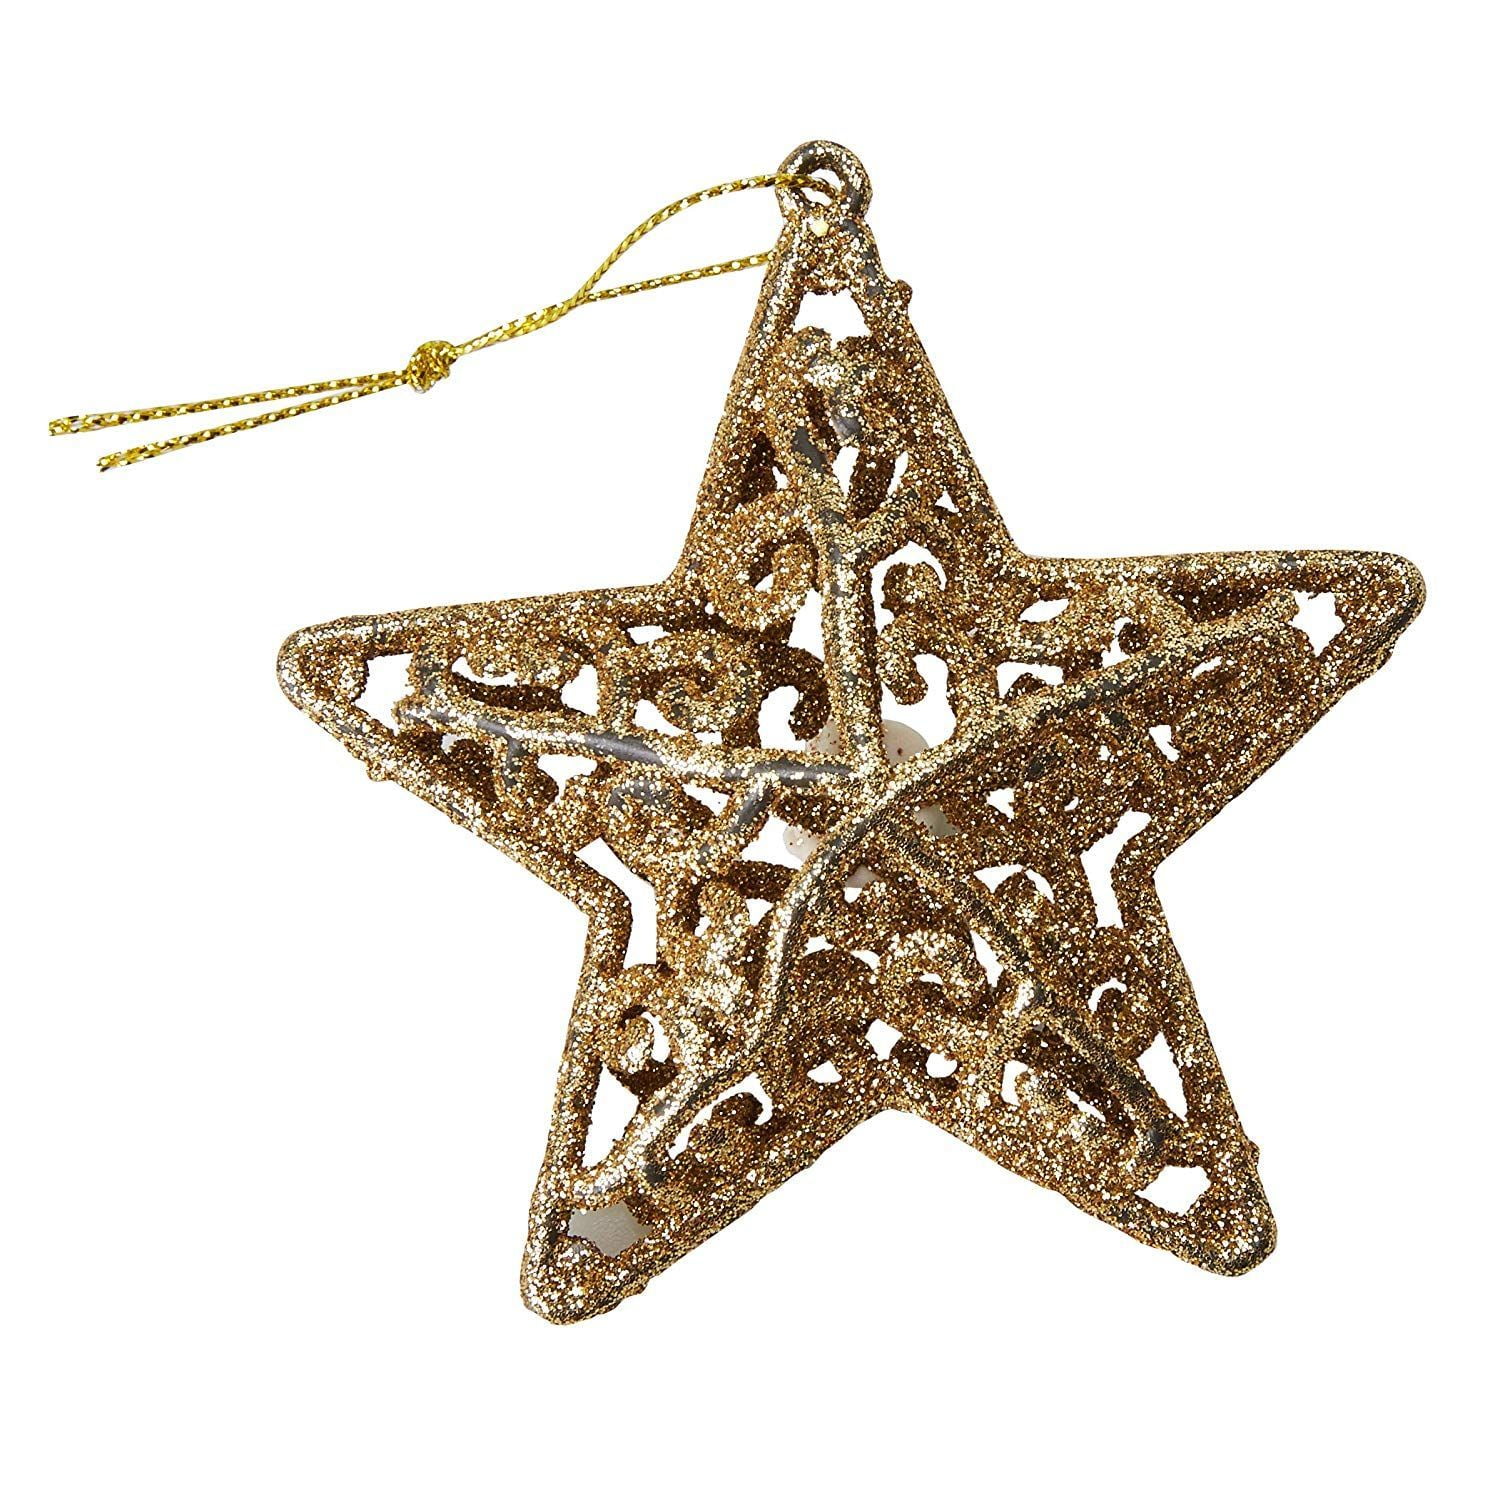 Robelli 6 Pack of Glitter 3D Star Christmas Tree Hanging Pendant Decorations 1, Gold